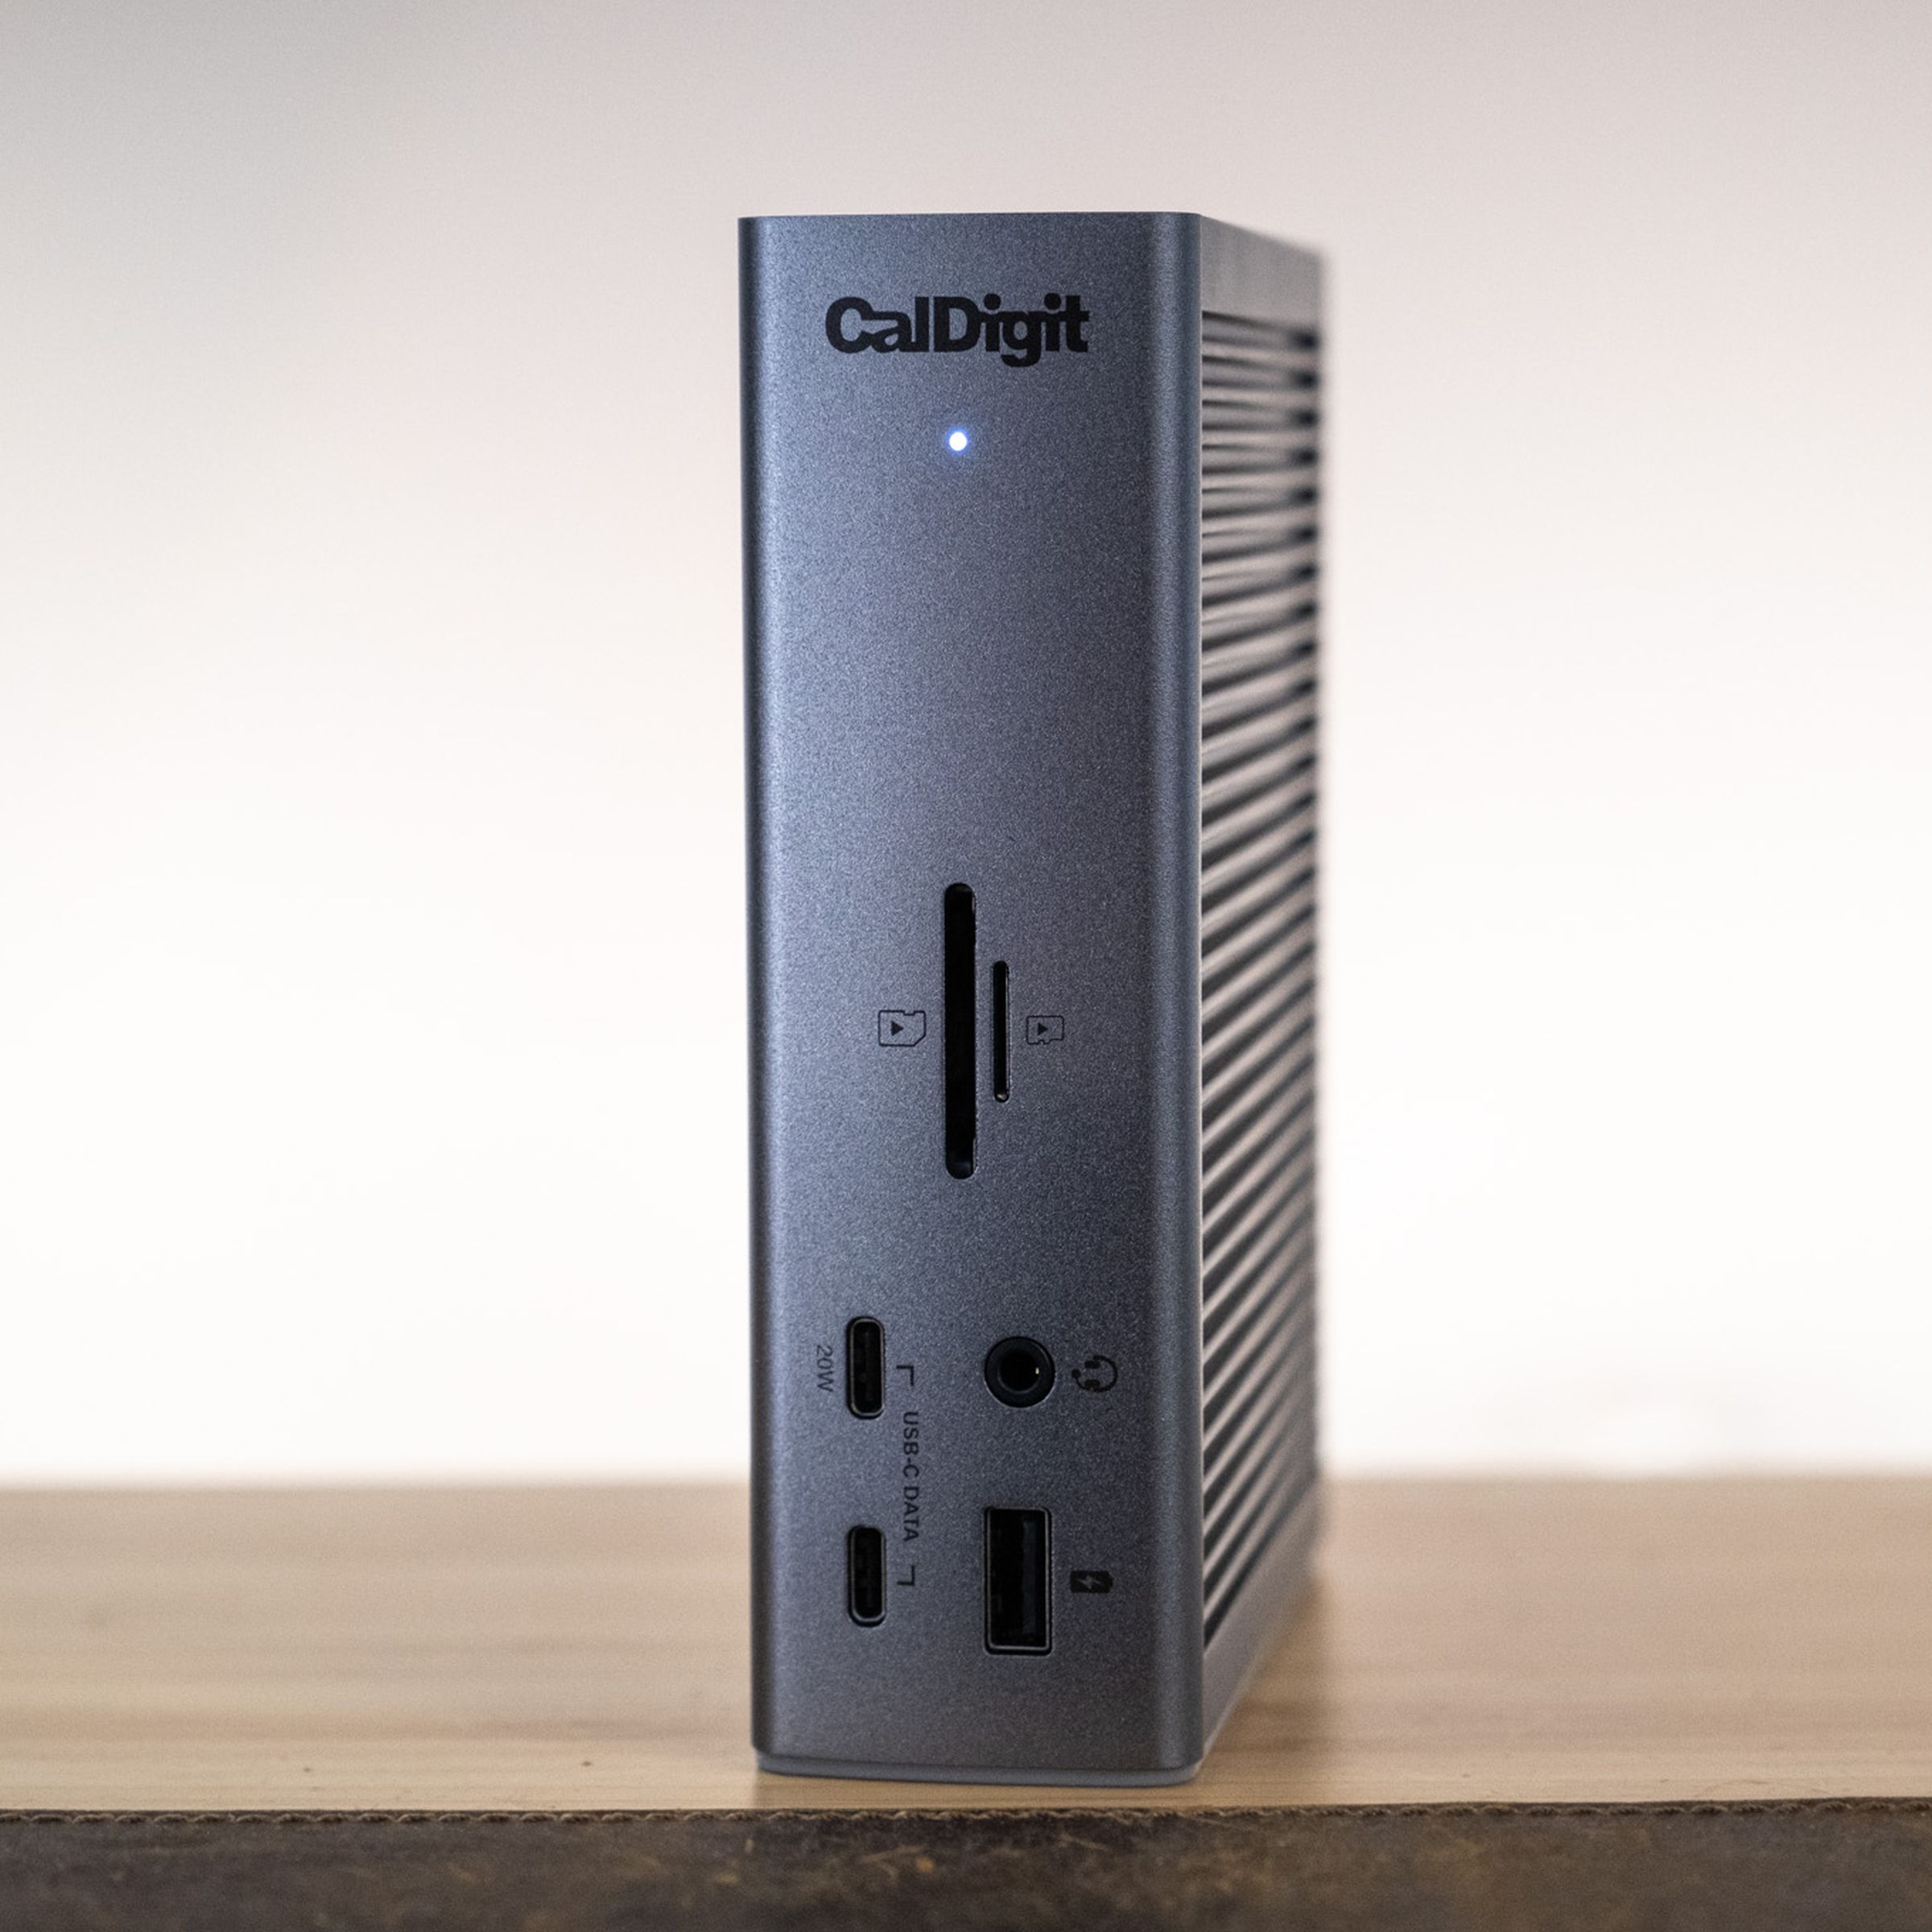 The CalDigit TS4 boasts 18 ports and high-speed connectivity.